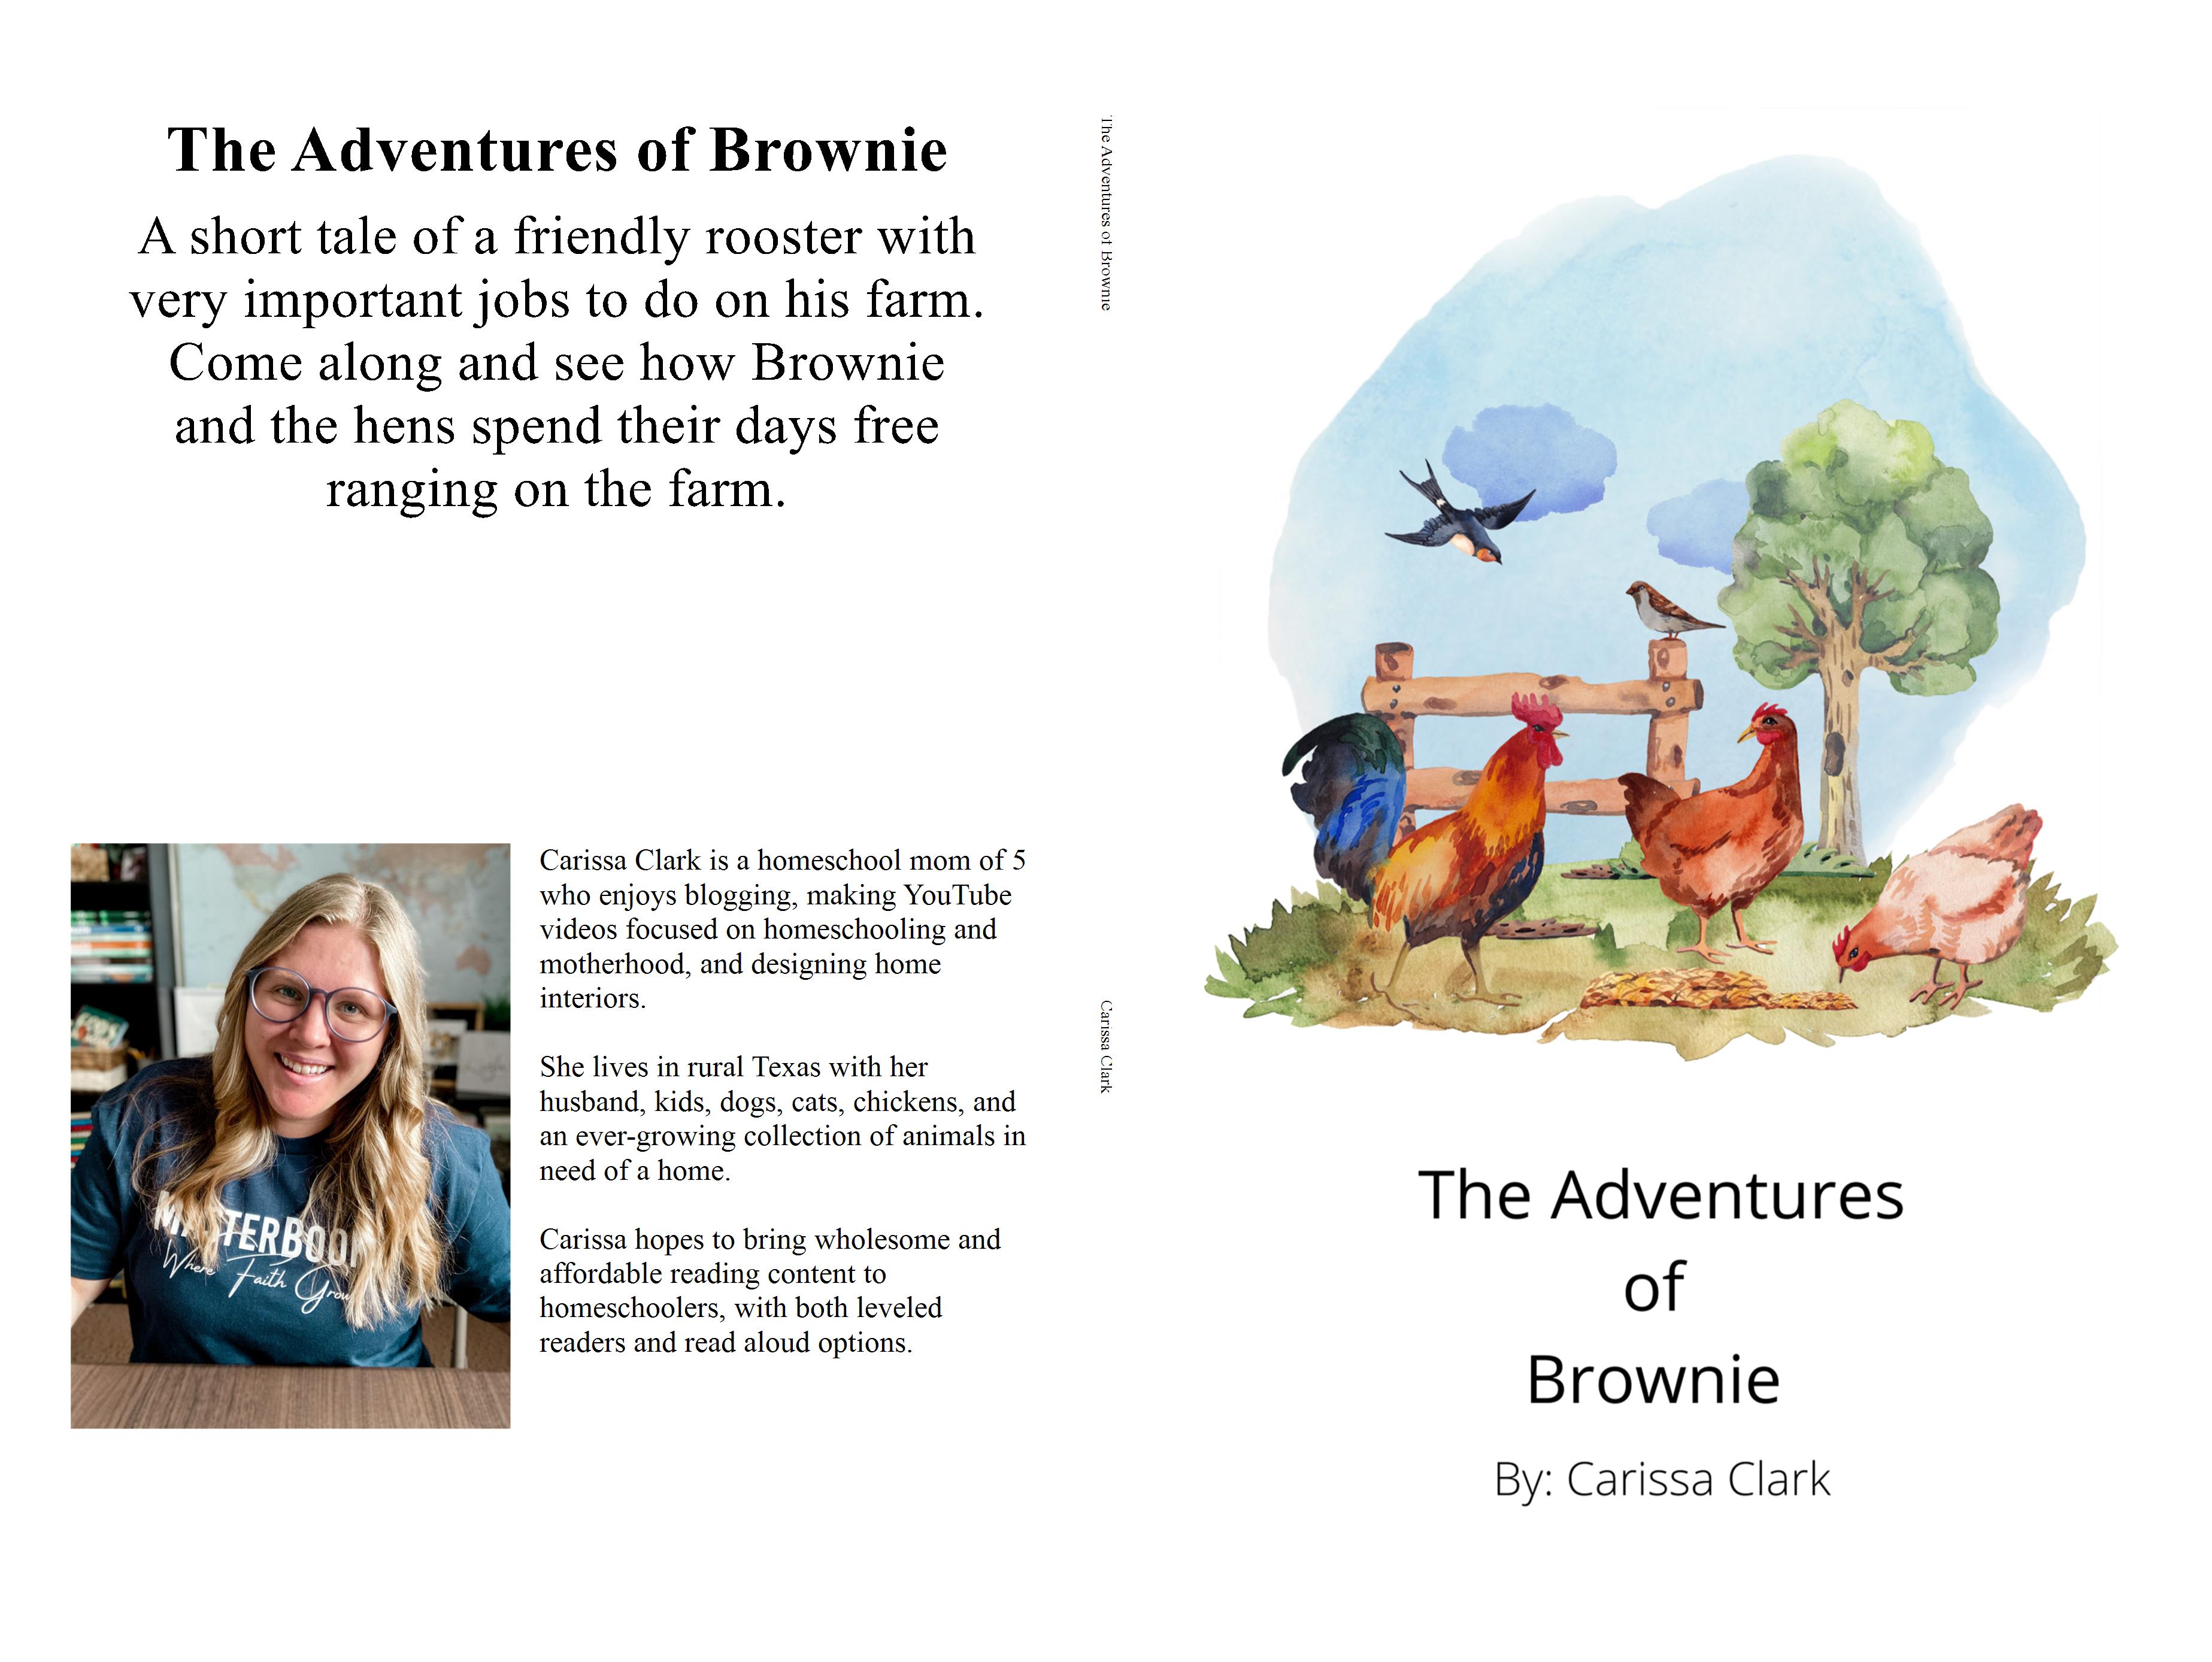 The Adventures of Brownie cover image